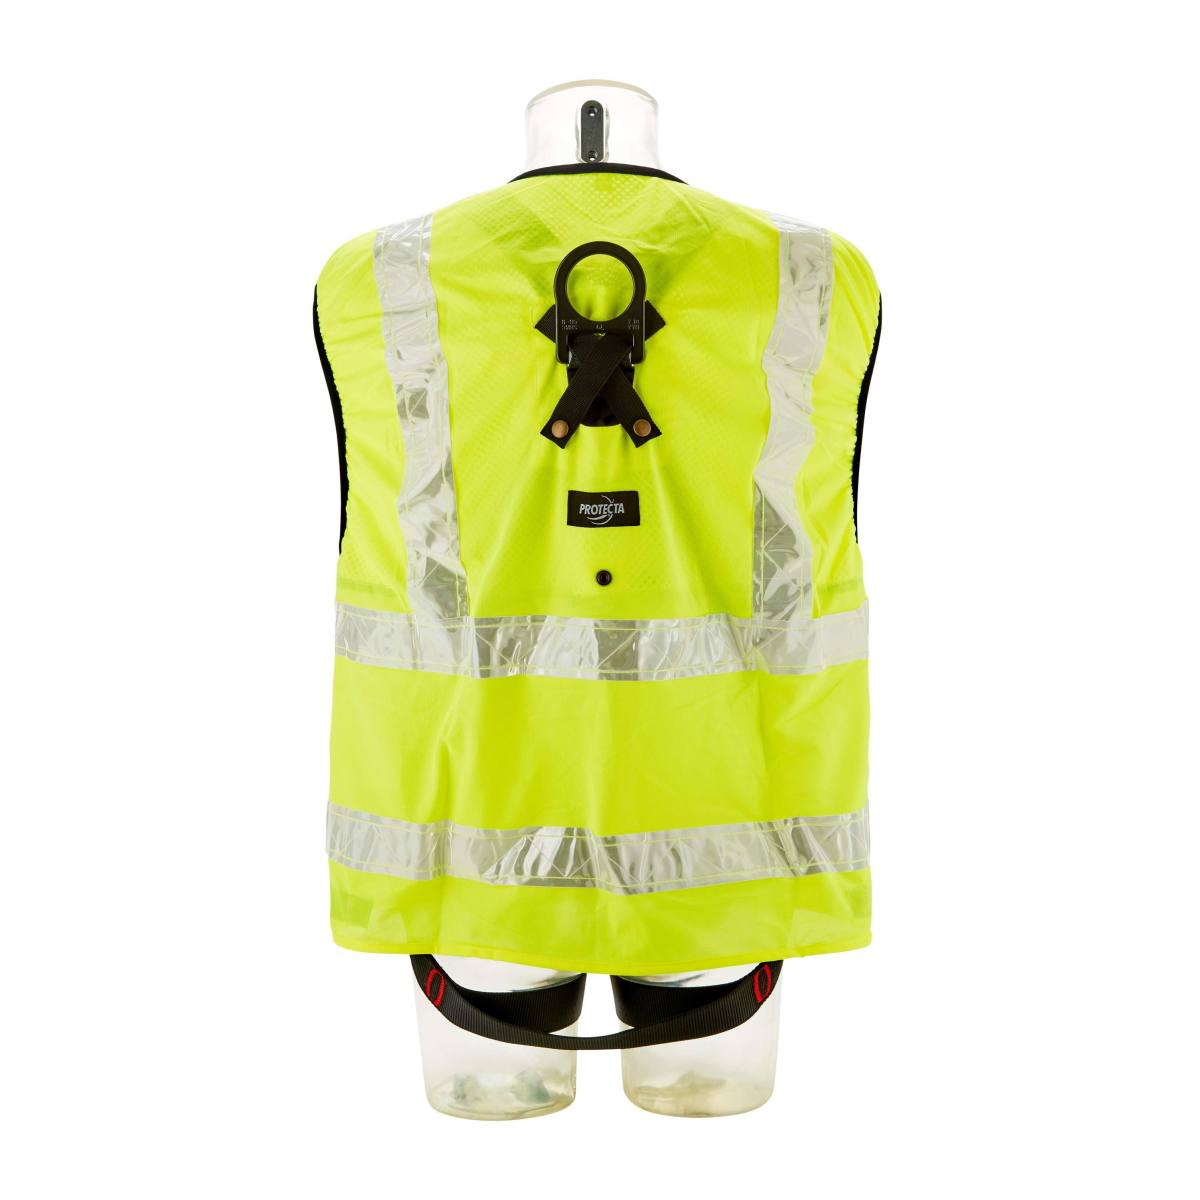 3M PROTECTA safety harness - chest and rear fall arrest eyelets neon yellow high-visibility vest standard VS chest and rear fall indicators belt end depot label protection with labeling field black coated fittings lanyard holder M/L